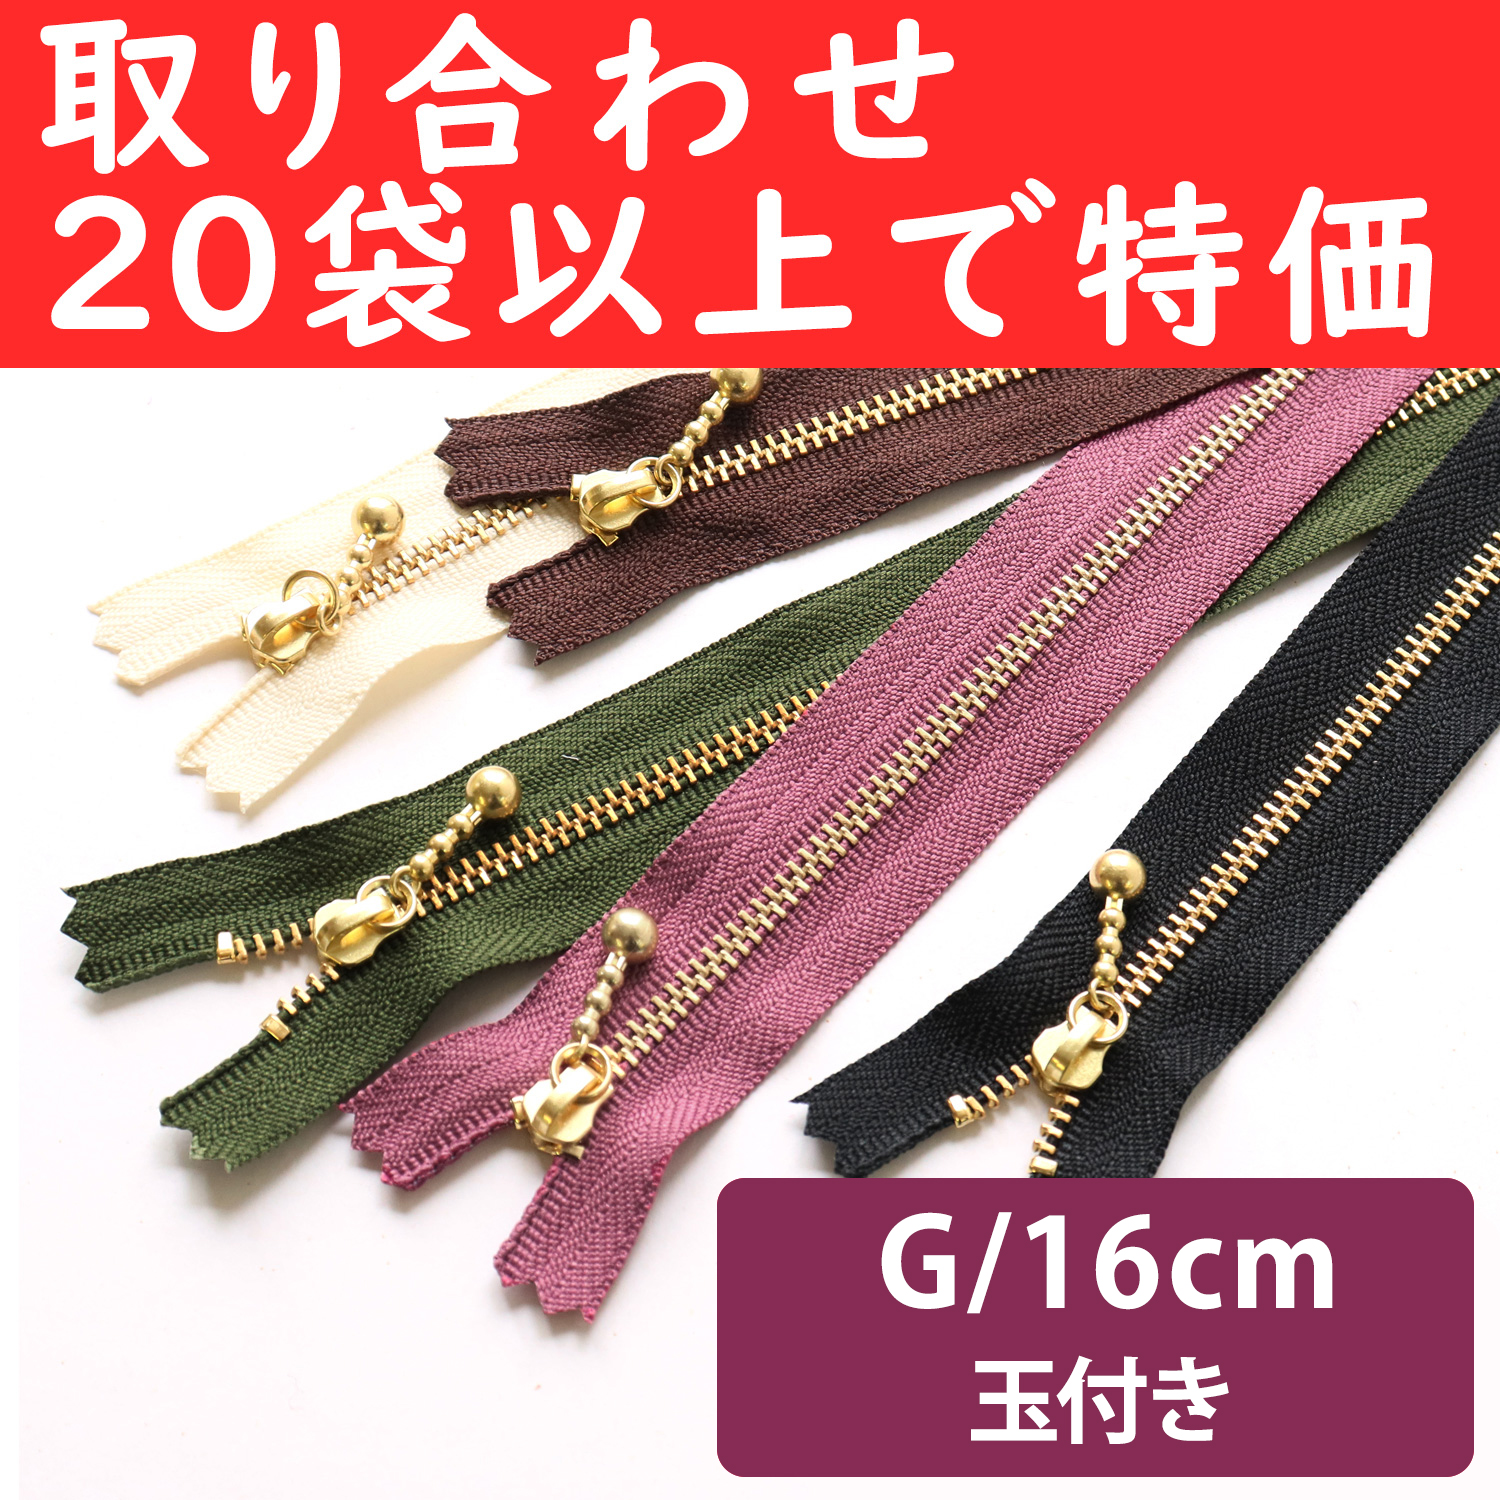 3G16-OVER200 Special)Ball Pull Zippers  G 16cm ", orders with 20 bags or more (bag)